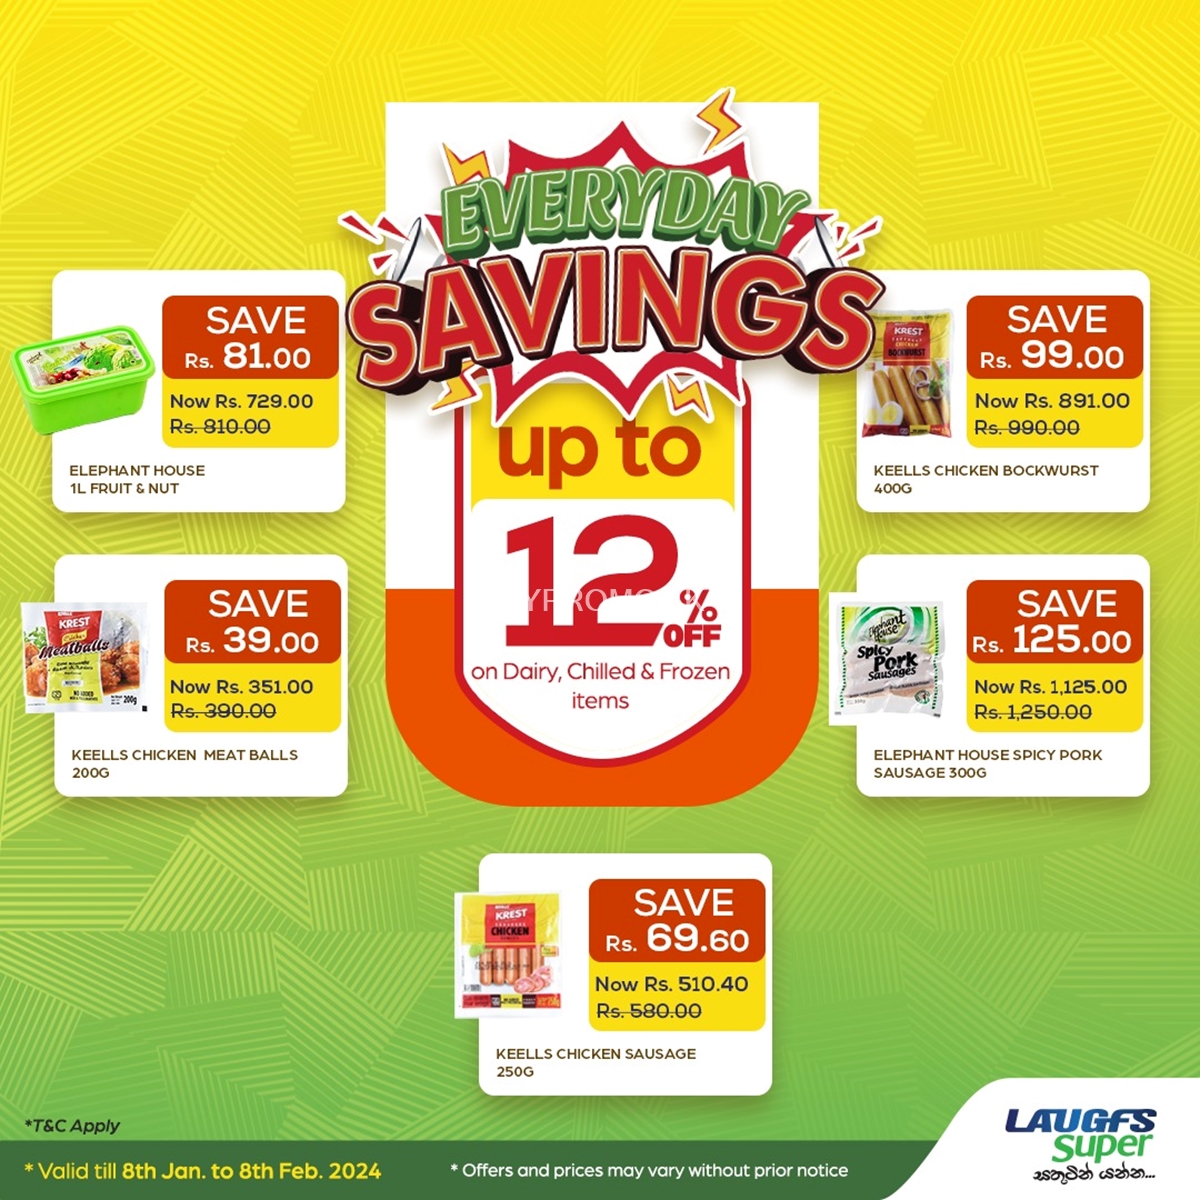 Up to 12% Off on Dairy, Chilled, & Frozen Items at LAUGFS Supermarket